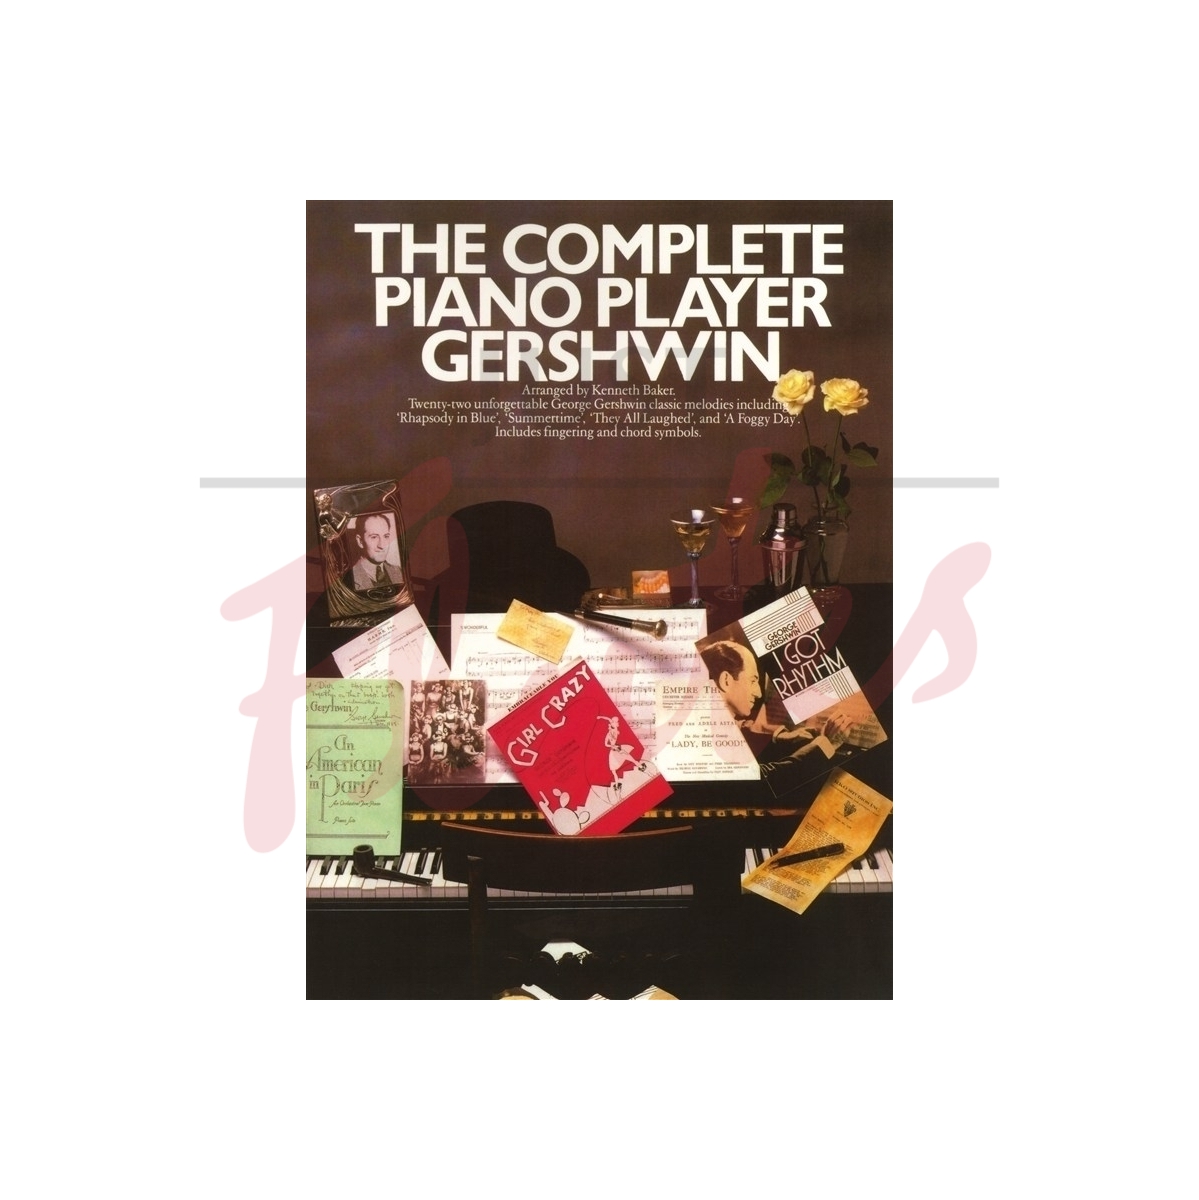 The Complete Piano Player: Gershwin